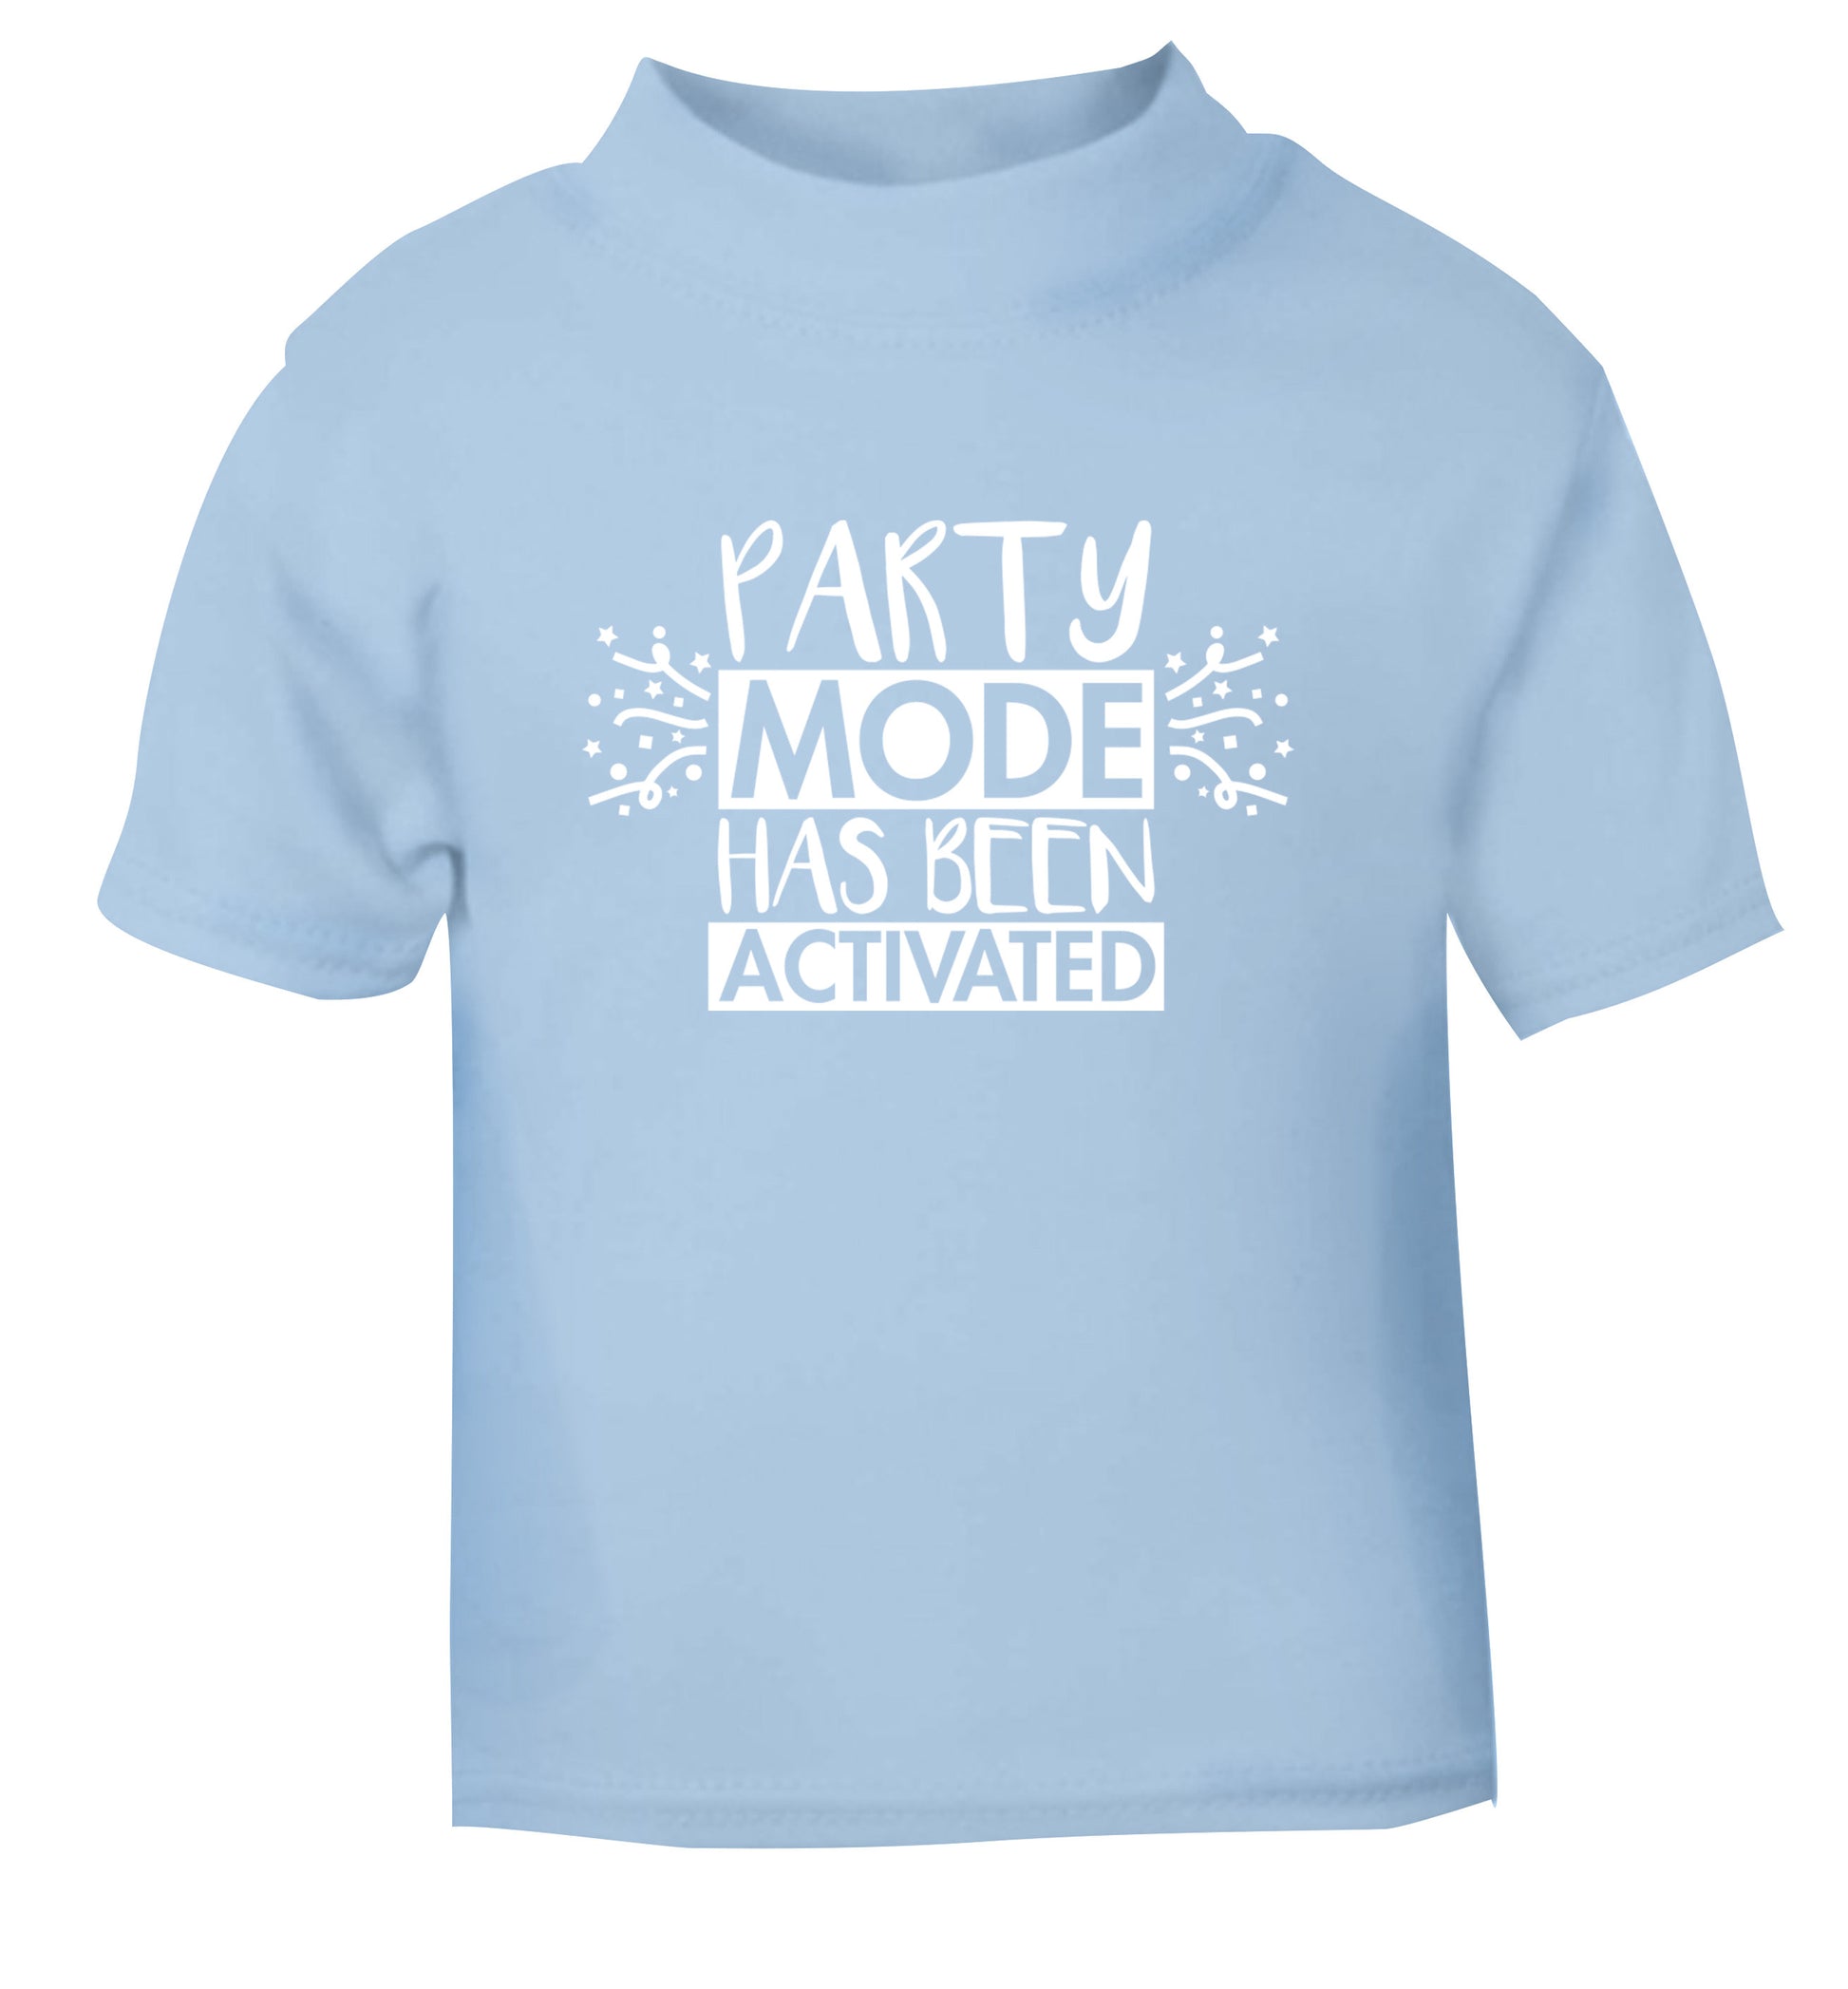 Please do not disturb party mode has been activated light blue Baby Toddler Tshirt 2 Years